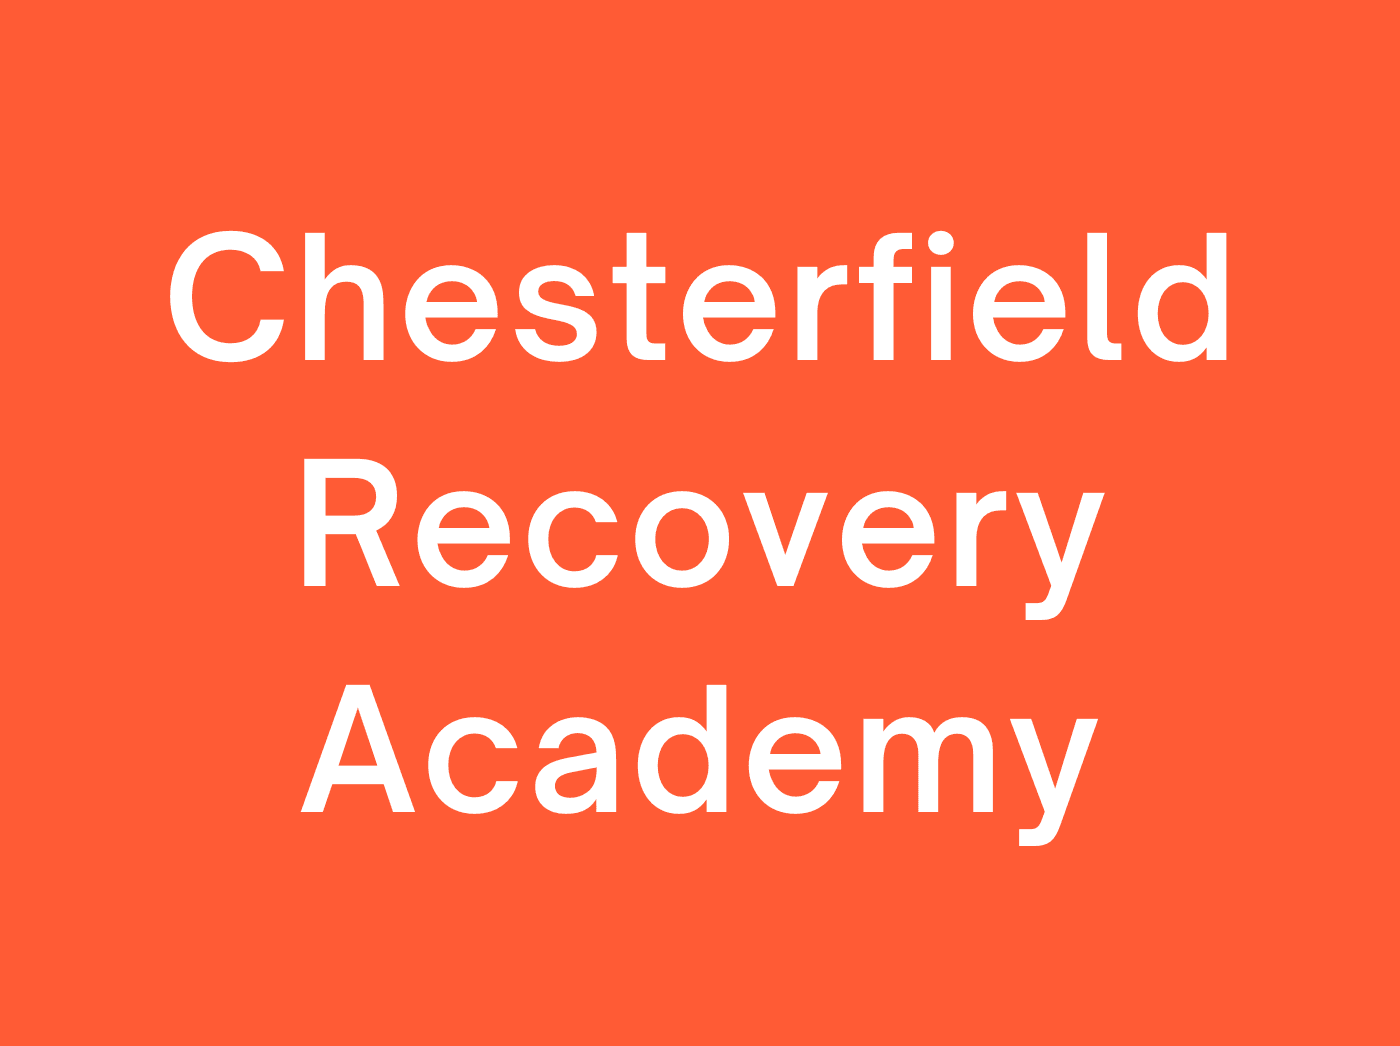 Chesterfield Recovery Academy